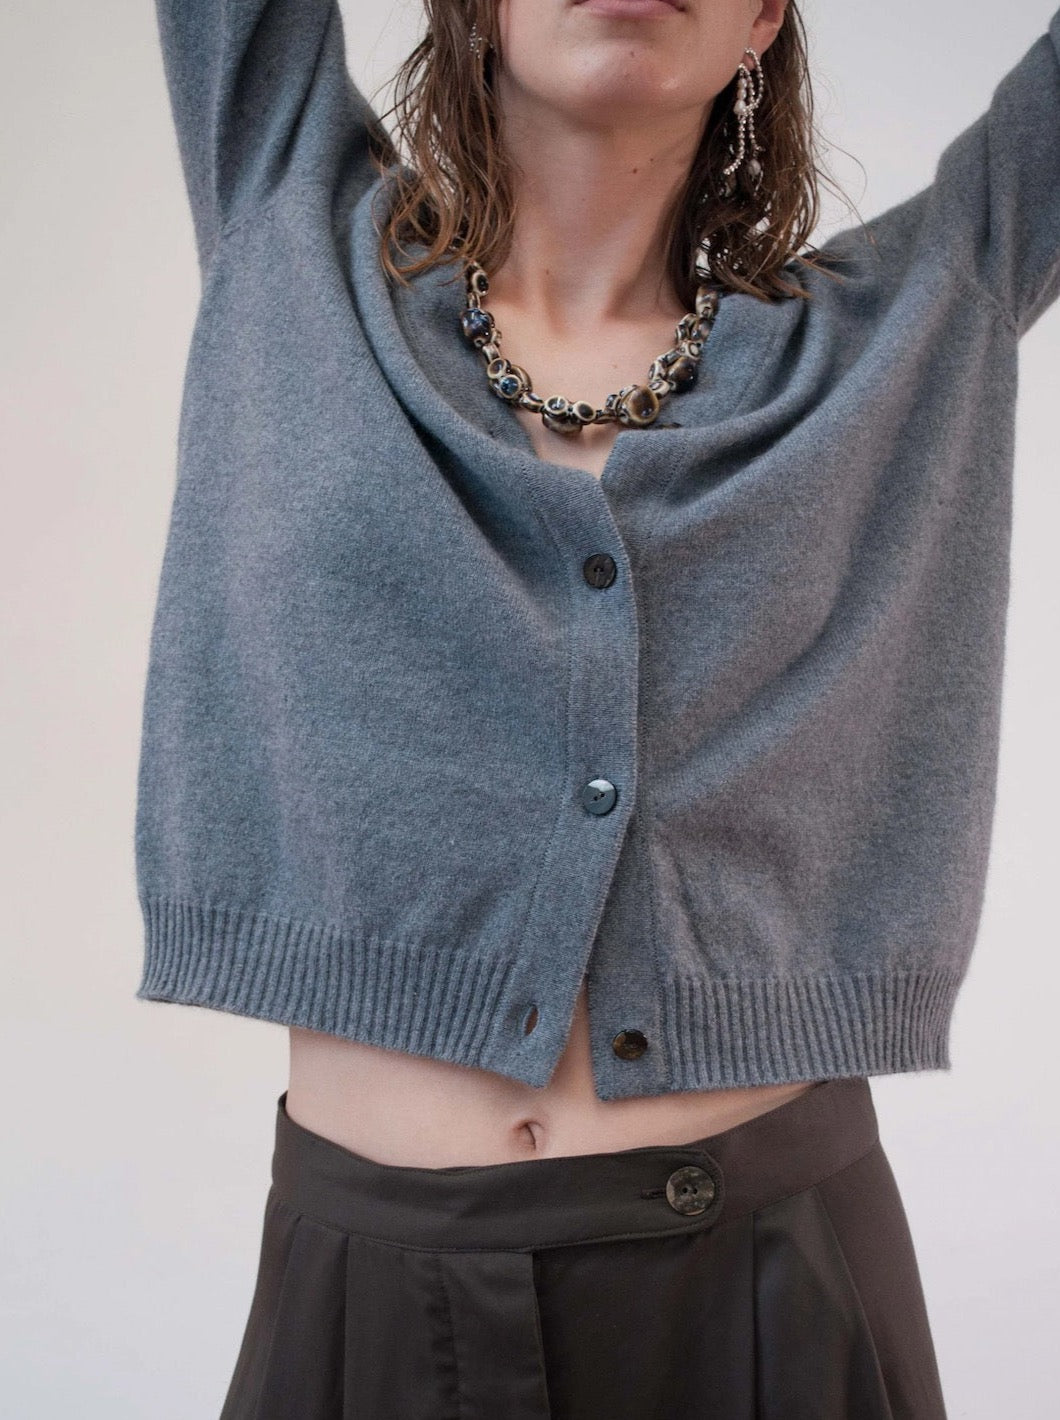 A woman wearing a Kom Cardigan – Stone by OVNA OVICH and black pants.